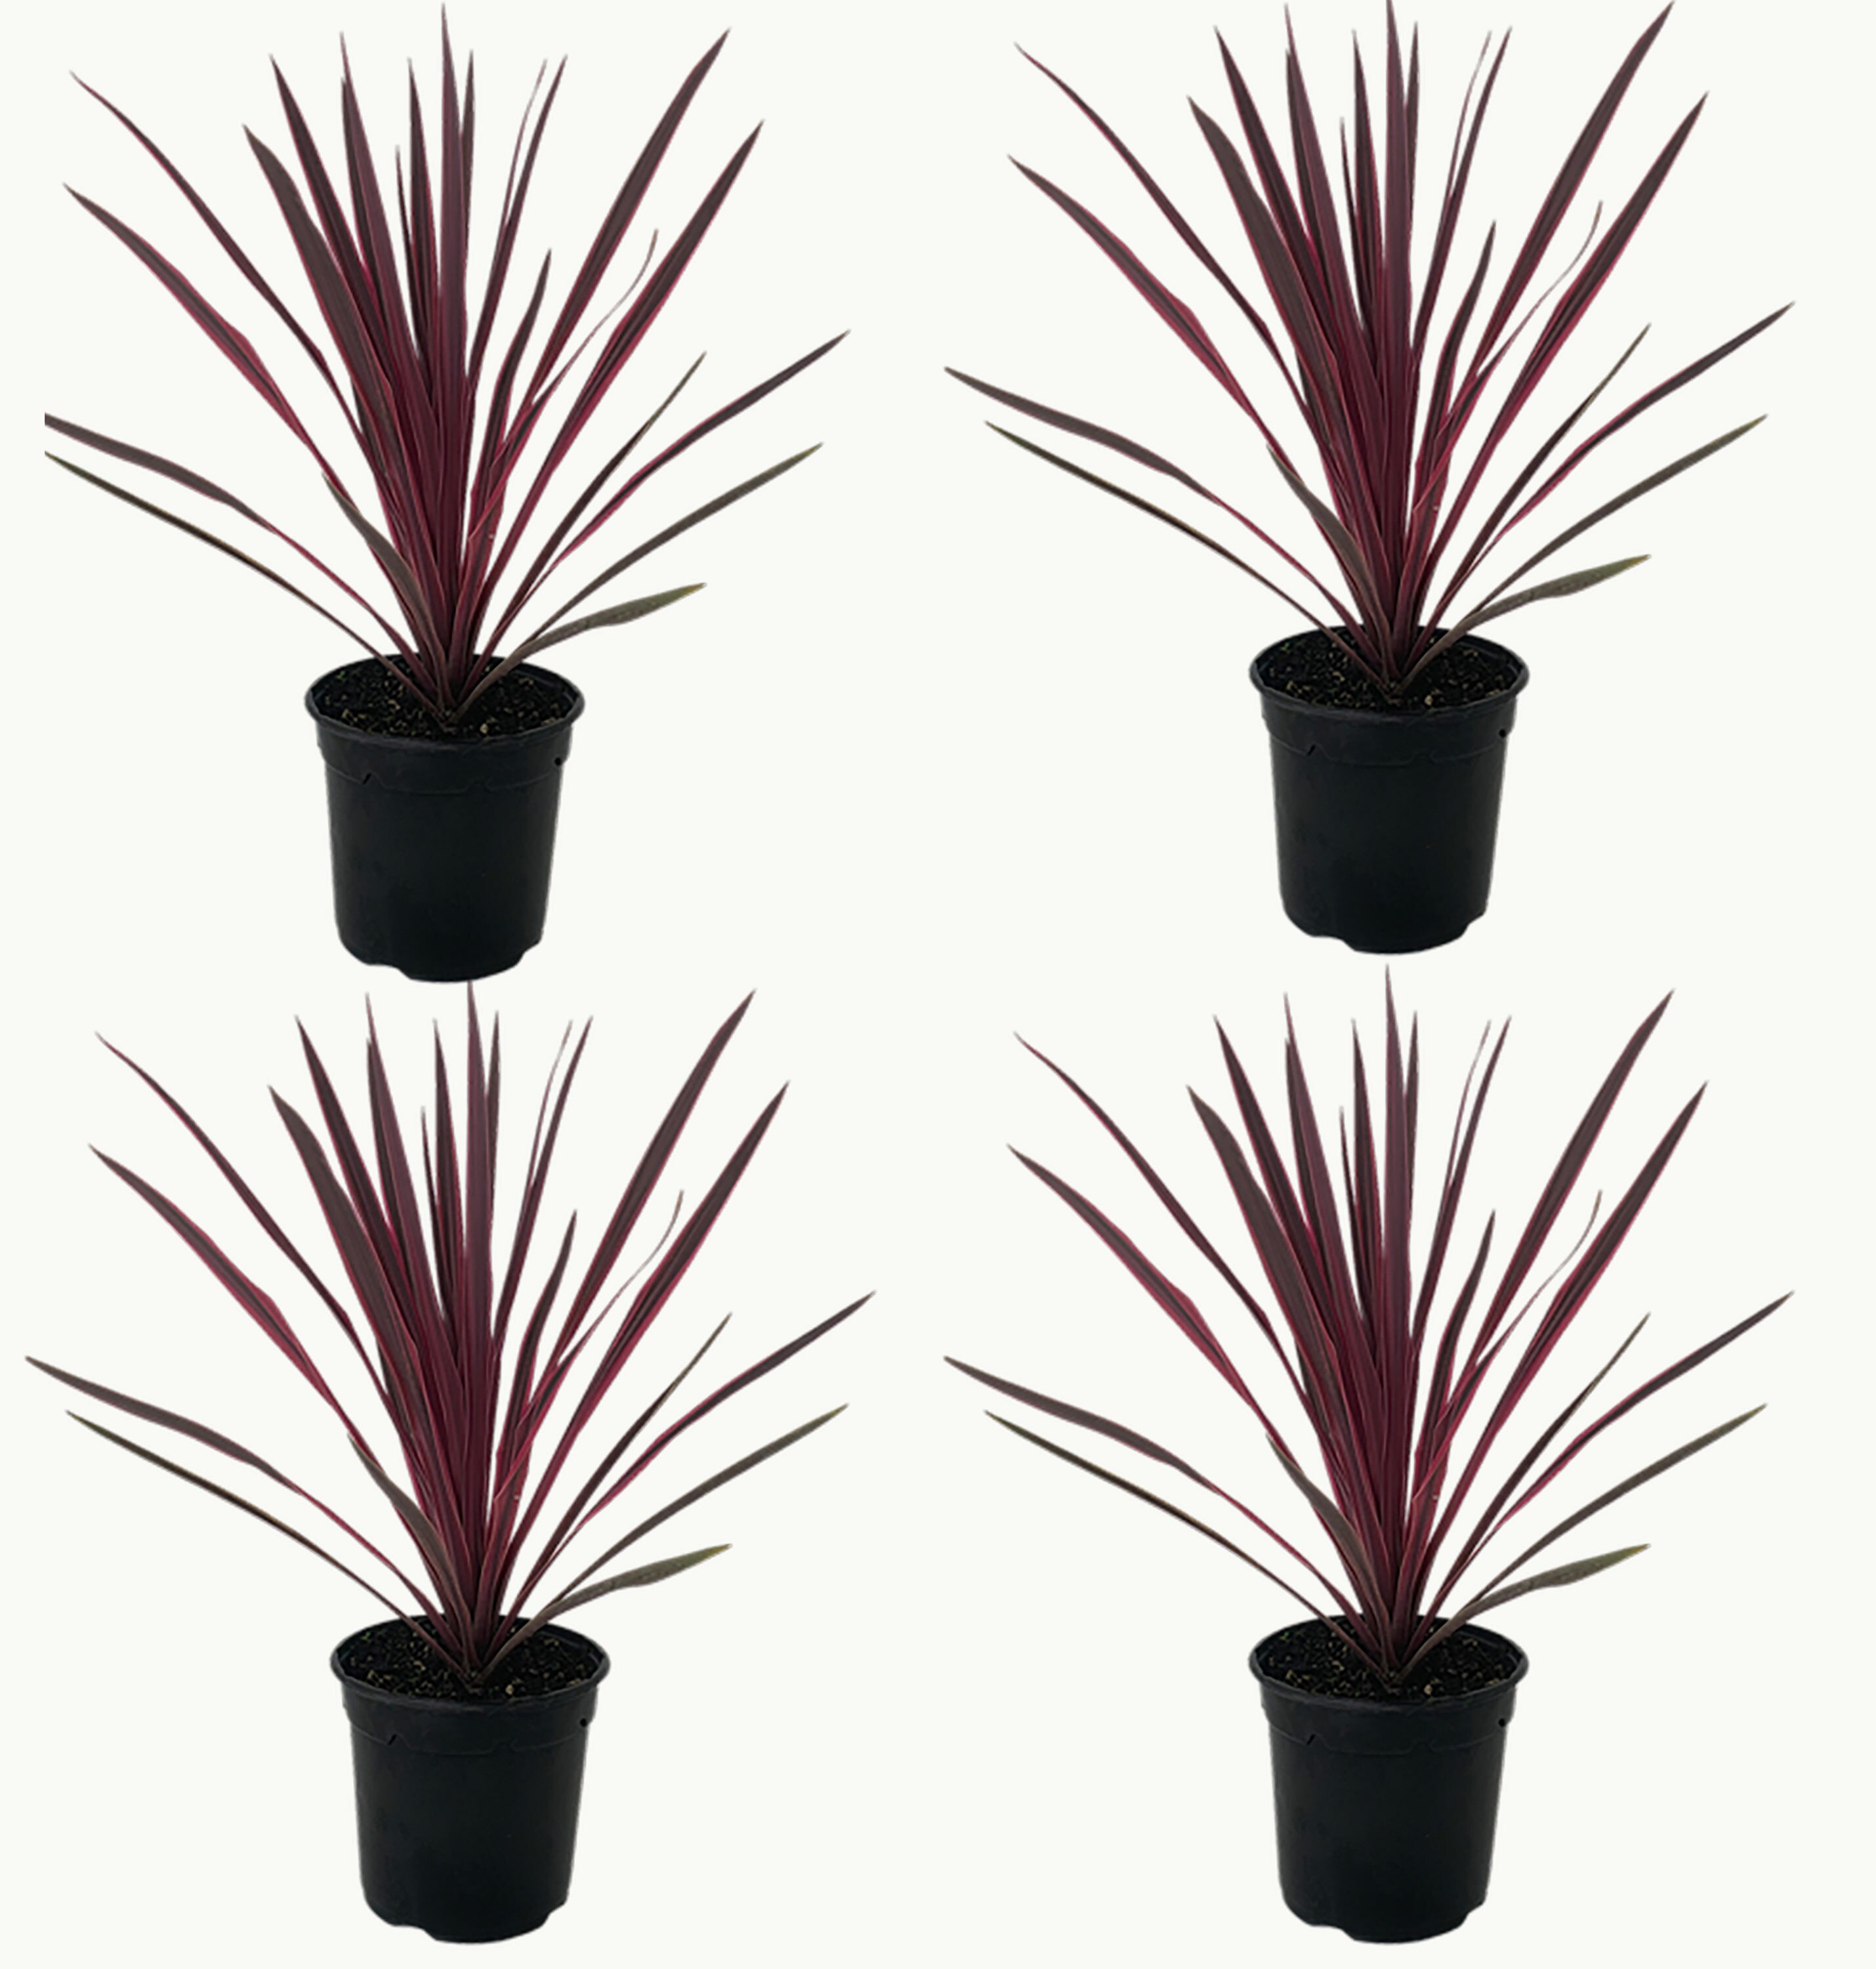 in 2.5-Quart 4-Pack in the Perennials department at Lowes.com